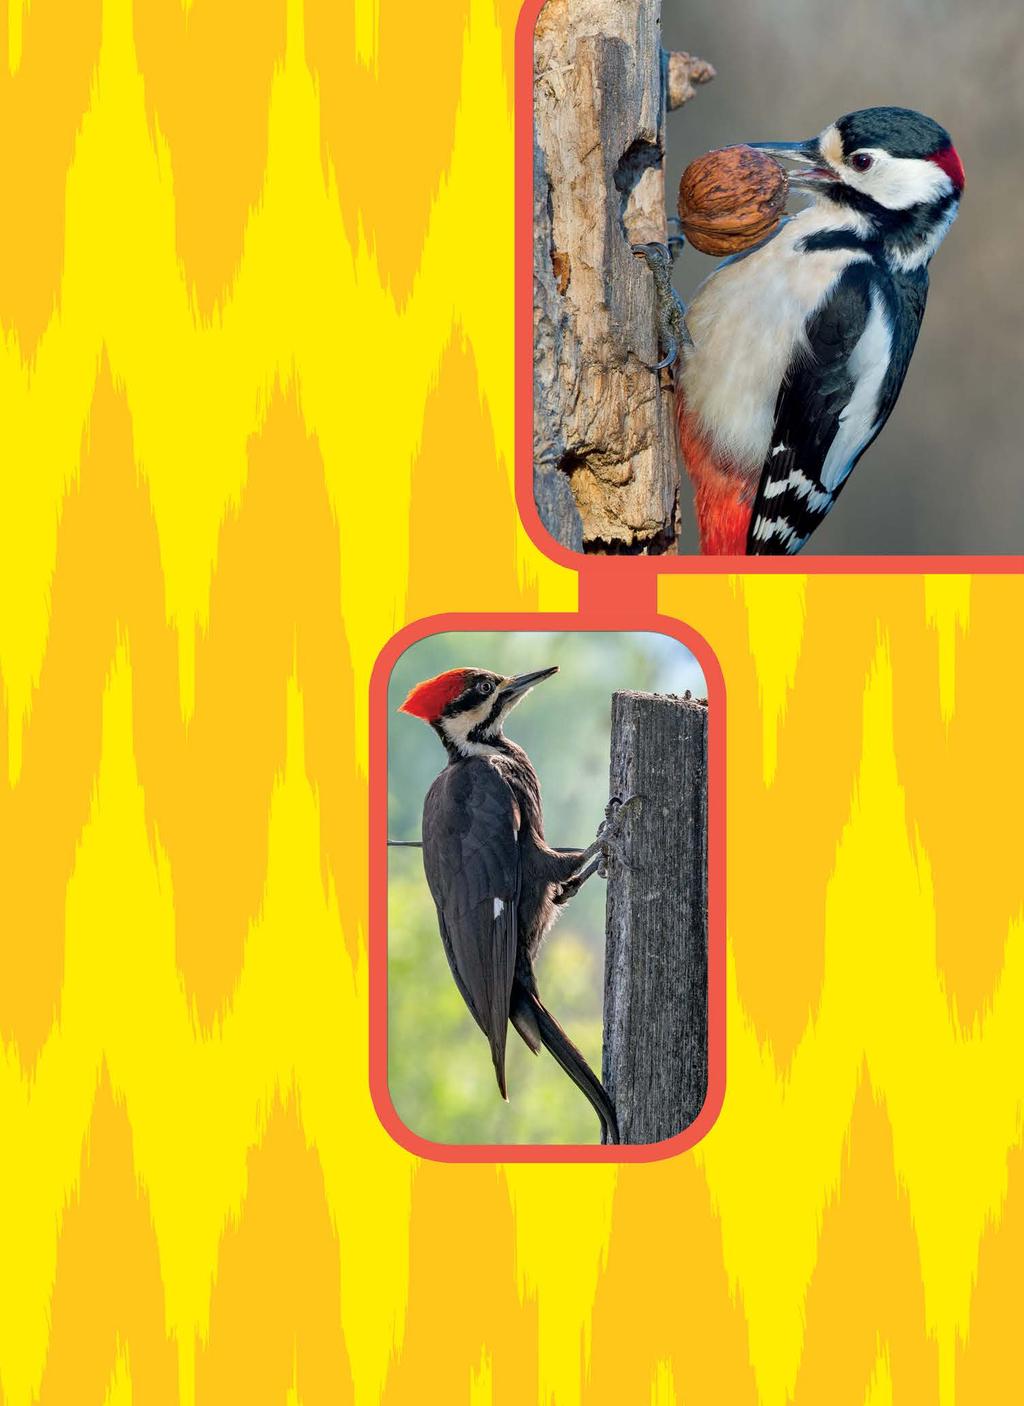 Birds A grub or a nut? Woodpeckers like to eat insects, especially grubs such as beetles and moths that live inside trees. They also eat fruit, nuts, and berries. Some woodpeckers feed on acorns.